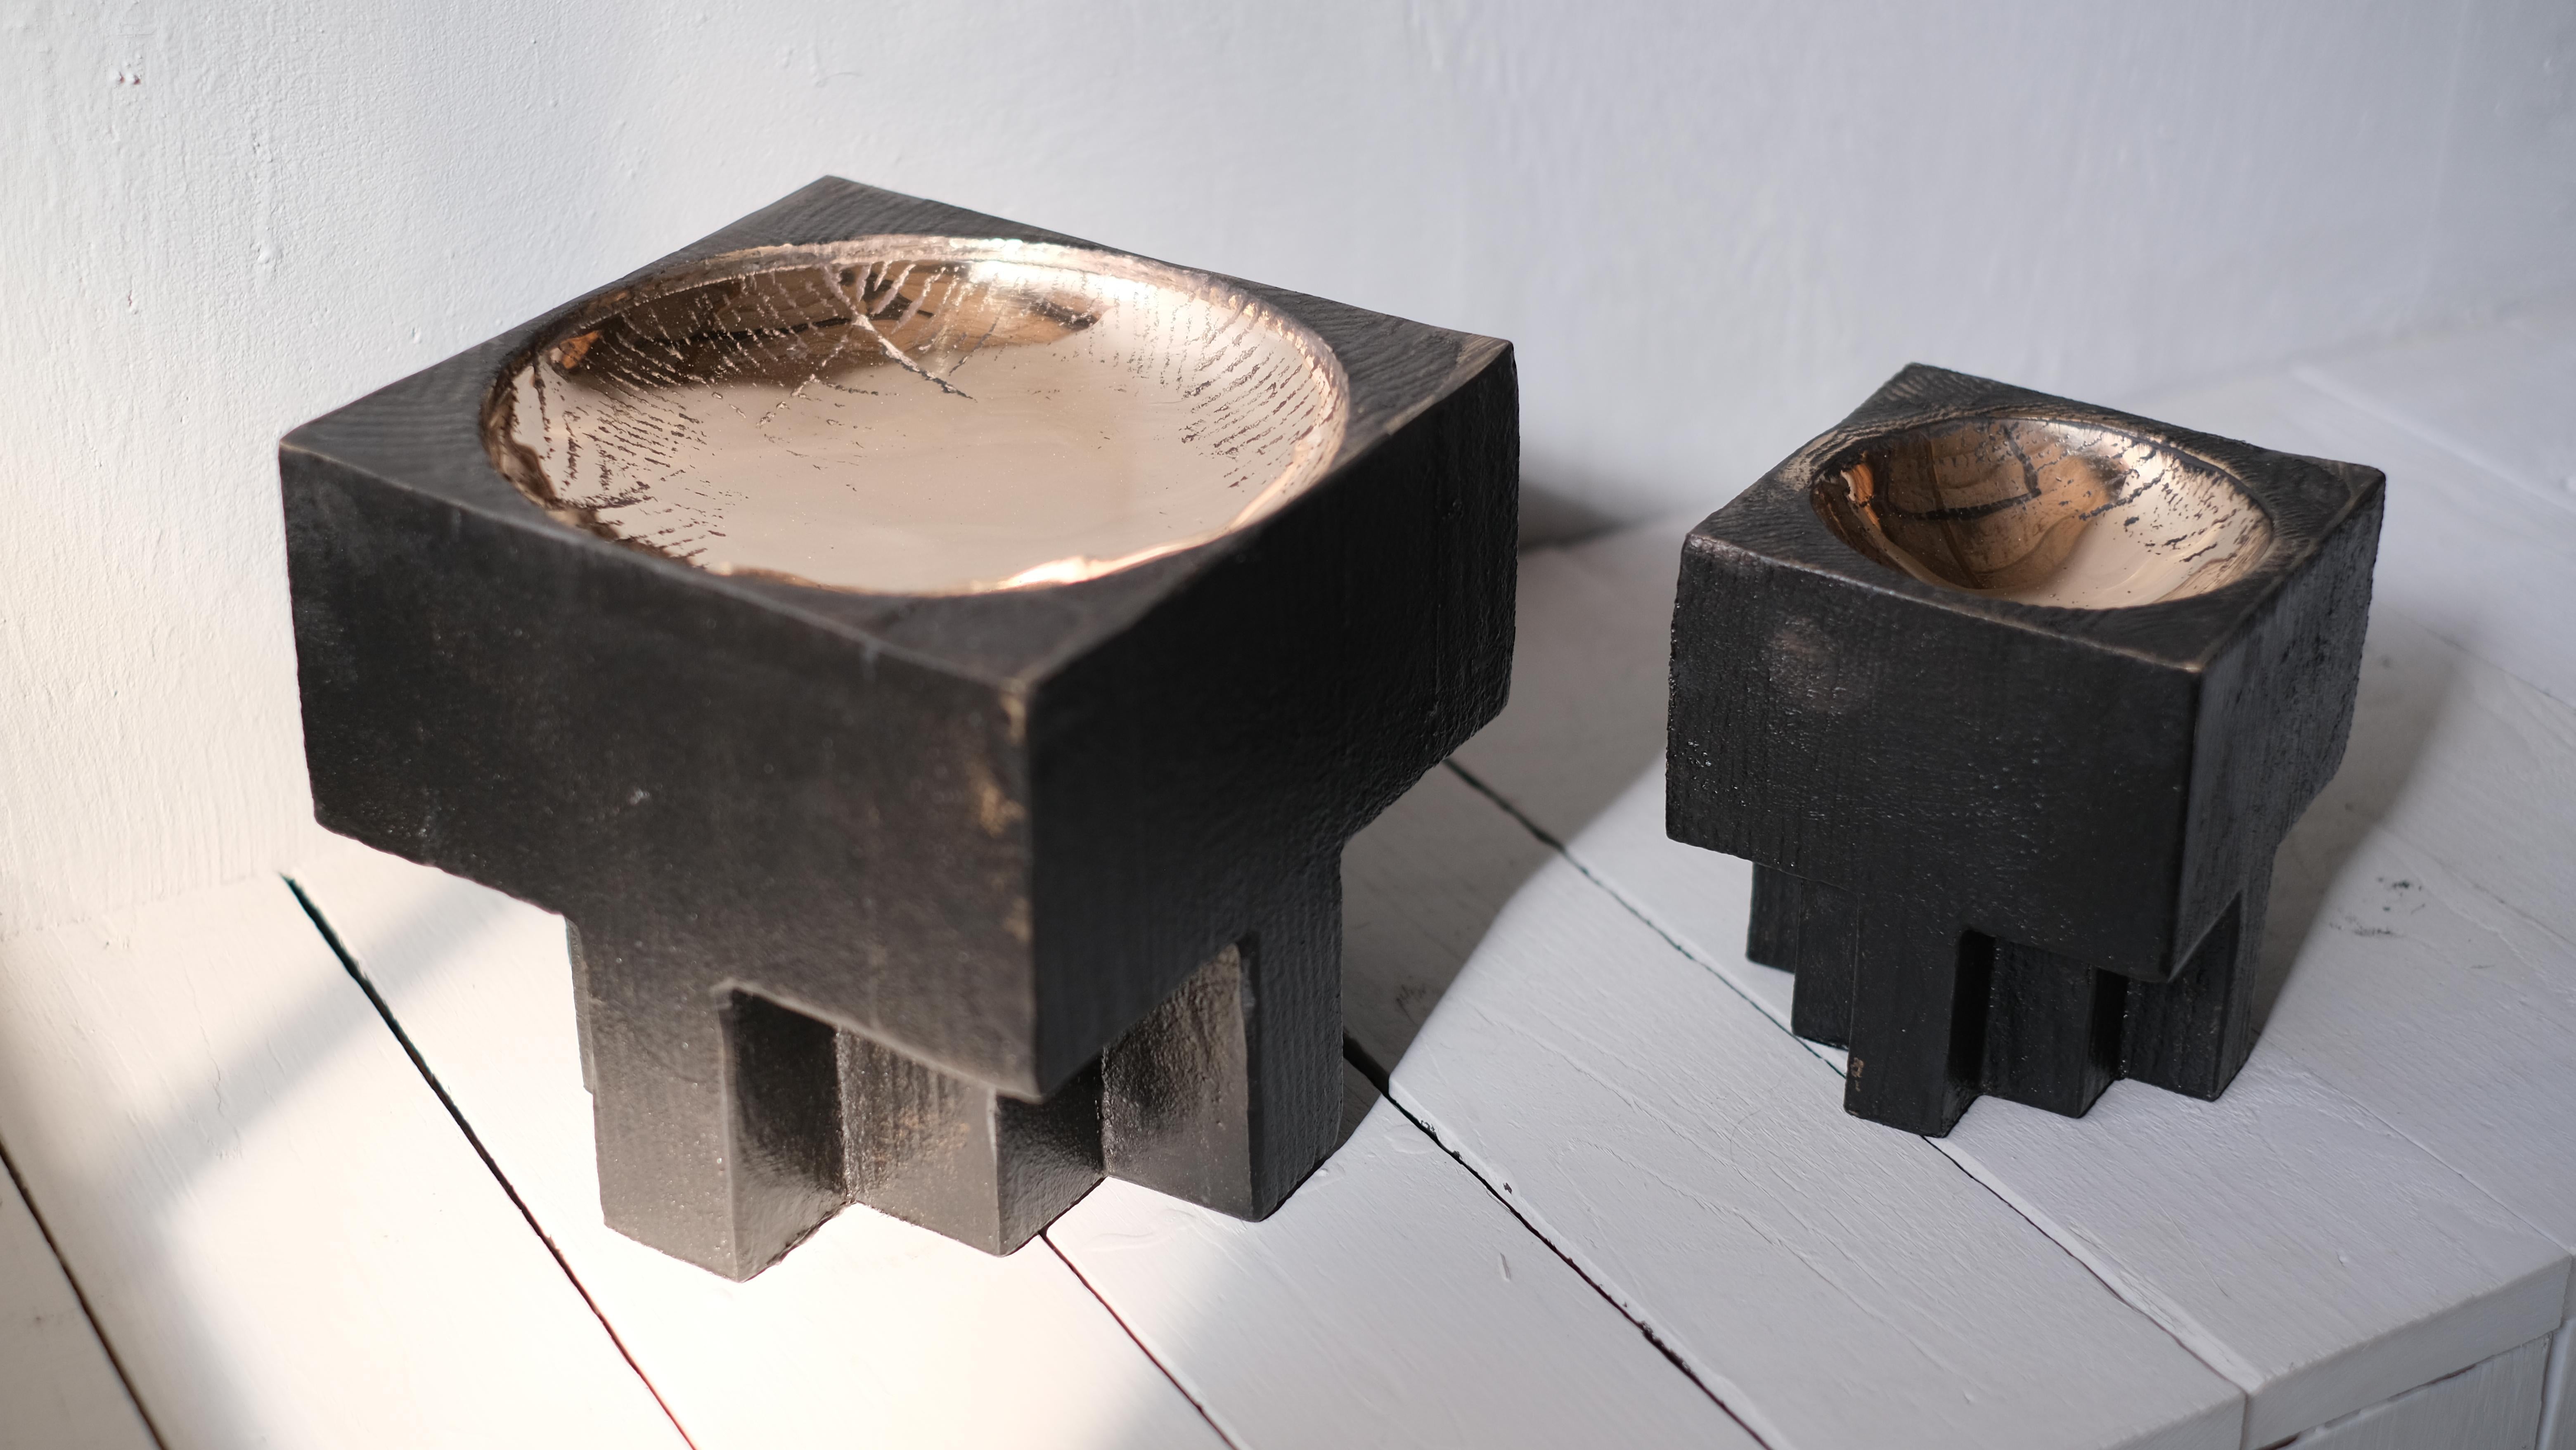 Pair of bronze cross pots - Signed Arno Declercq
Sand casted in pink bronze and hand polished. 
Measures: small 11 cm wide x 11 cm long x 14 cm high / 4.5” wide x 4.5” long x 5” high
Large 19 cm wide x 19 cm long x 17 cm high / 7.5” wide x 7.5”